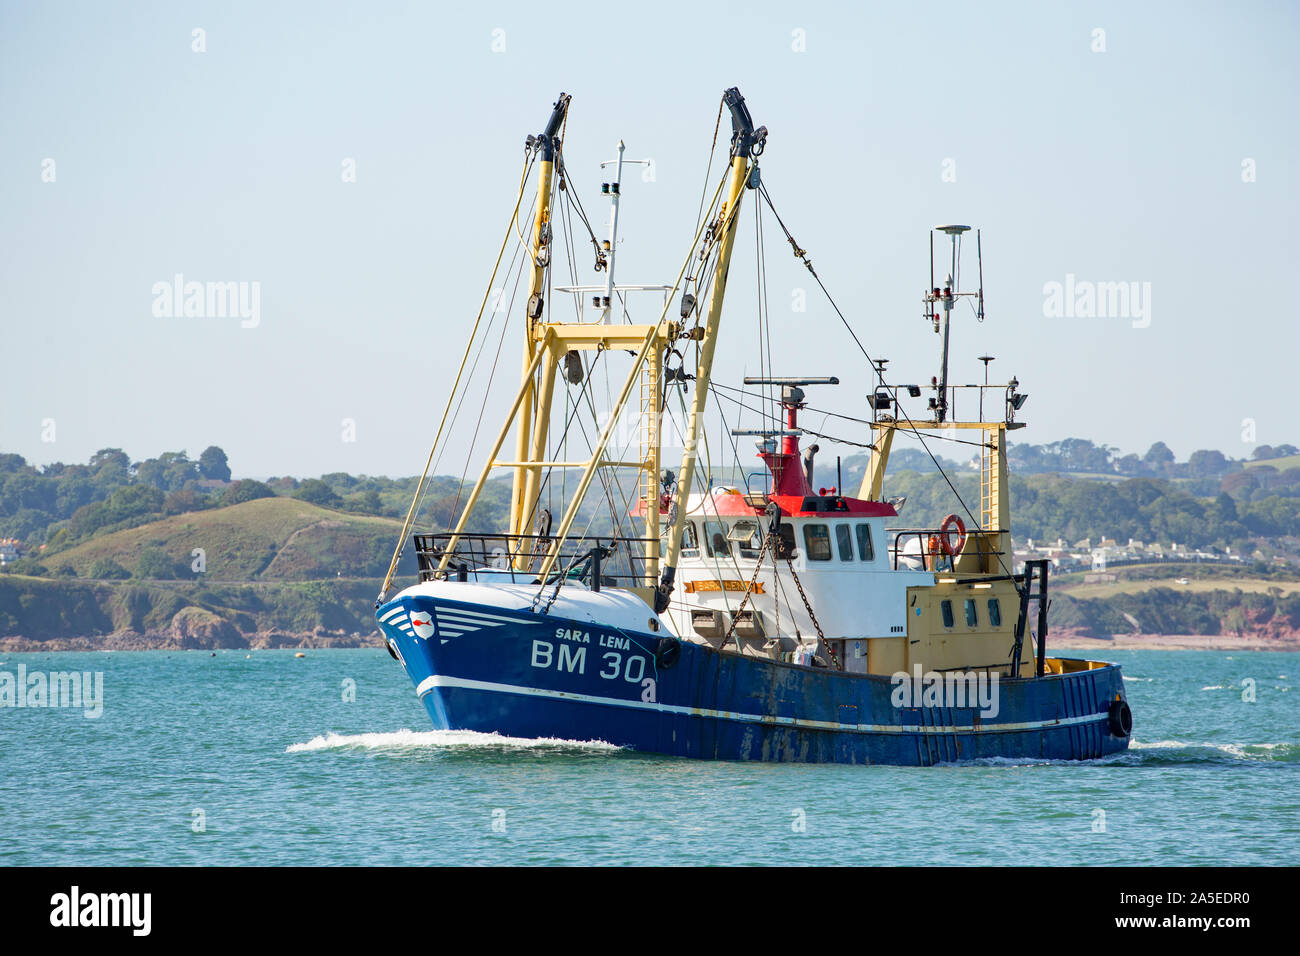 A fishing boat entering the outer harbour of Brixham Port in the Autumn. Brixham is home to a large fishing fleet and fish market. Devon England UK GB Stock Photo